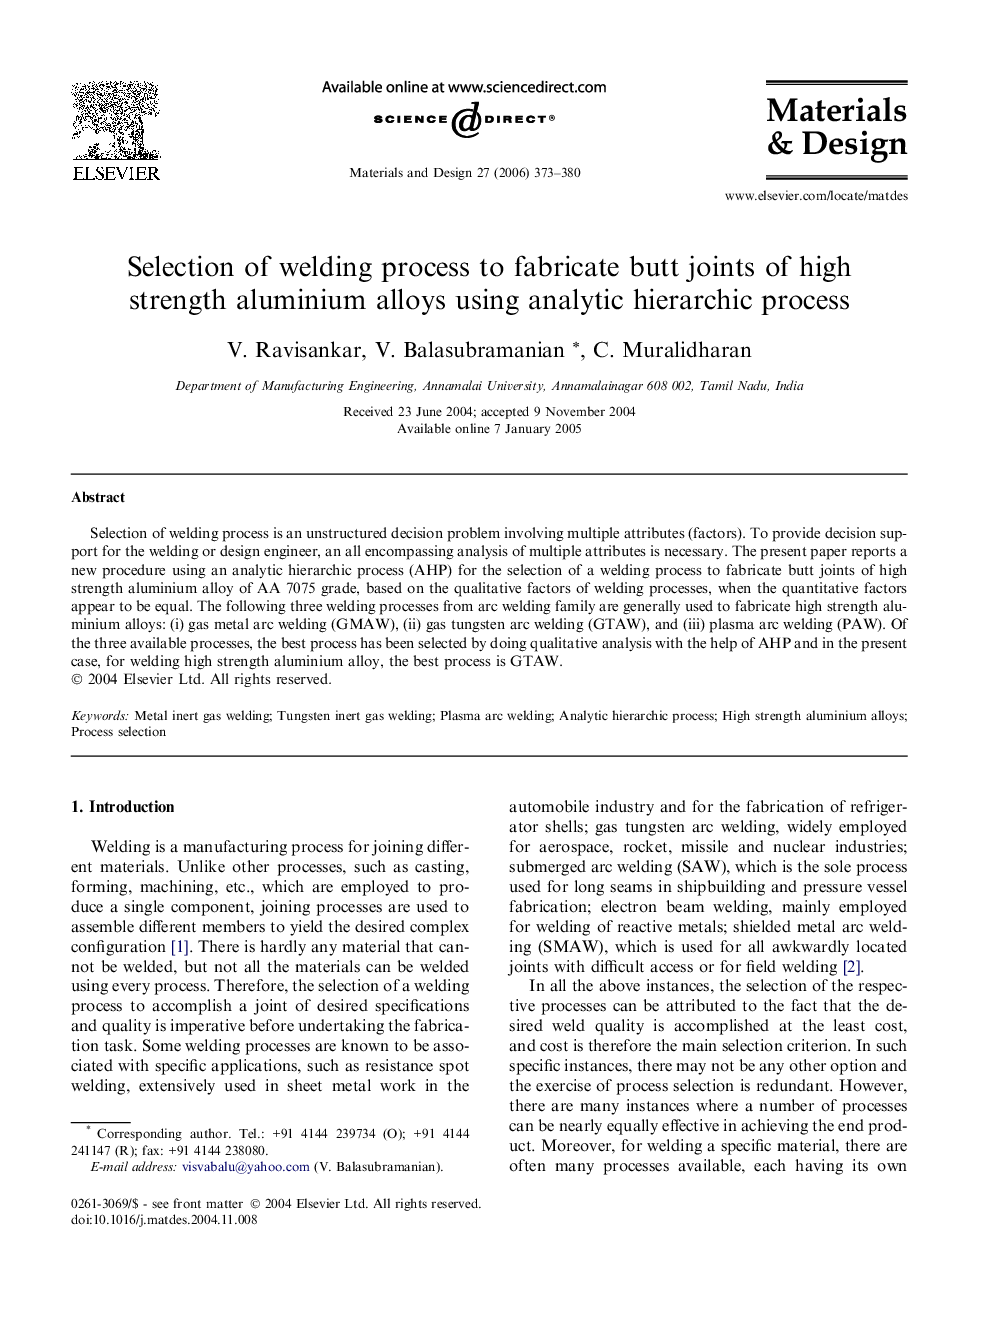 Selection of welding process to fabricate butt joints of high strength aluminium alloys using analytic hierarchic process